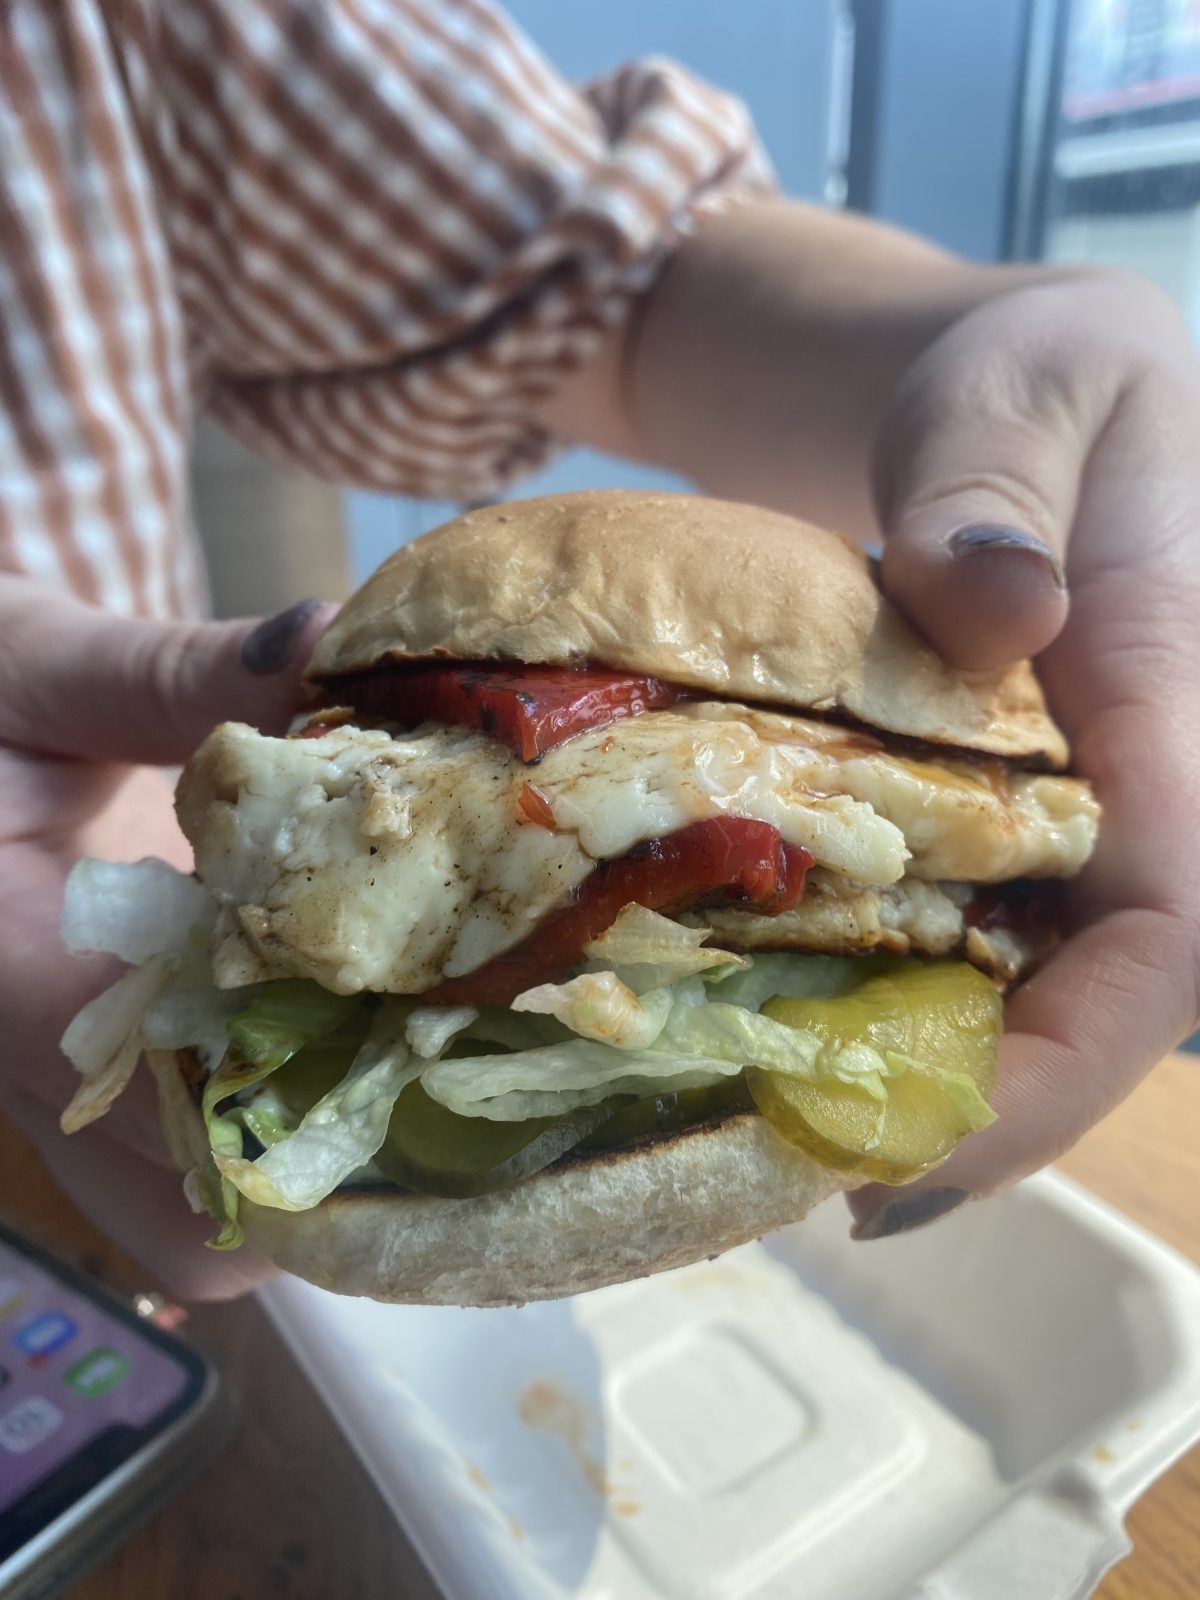 A burger with red pepper and halloumi.